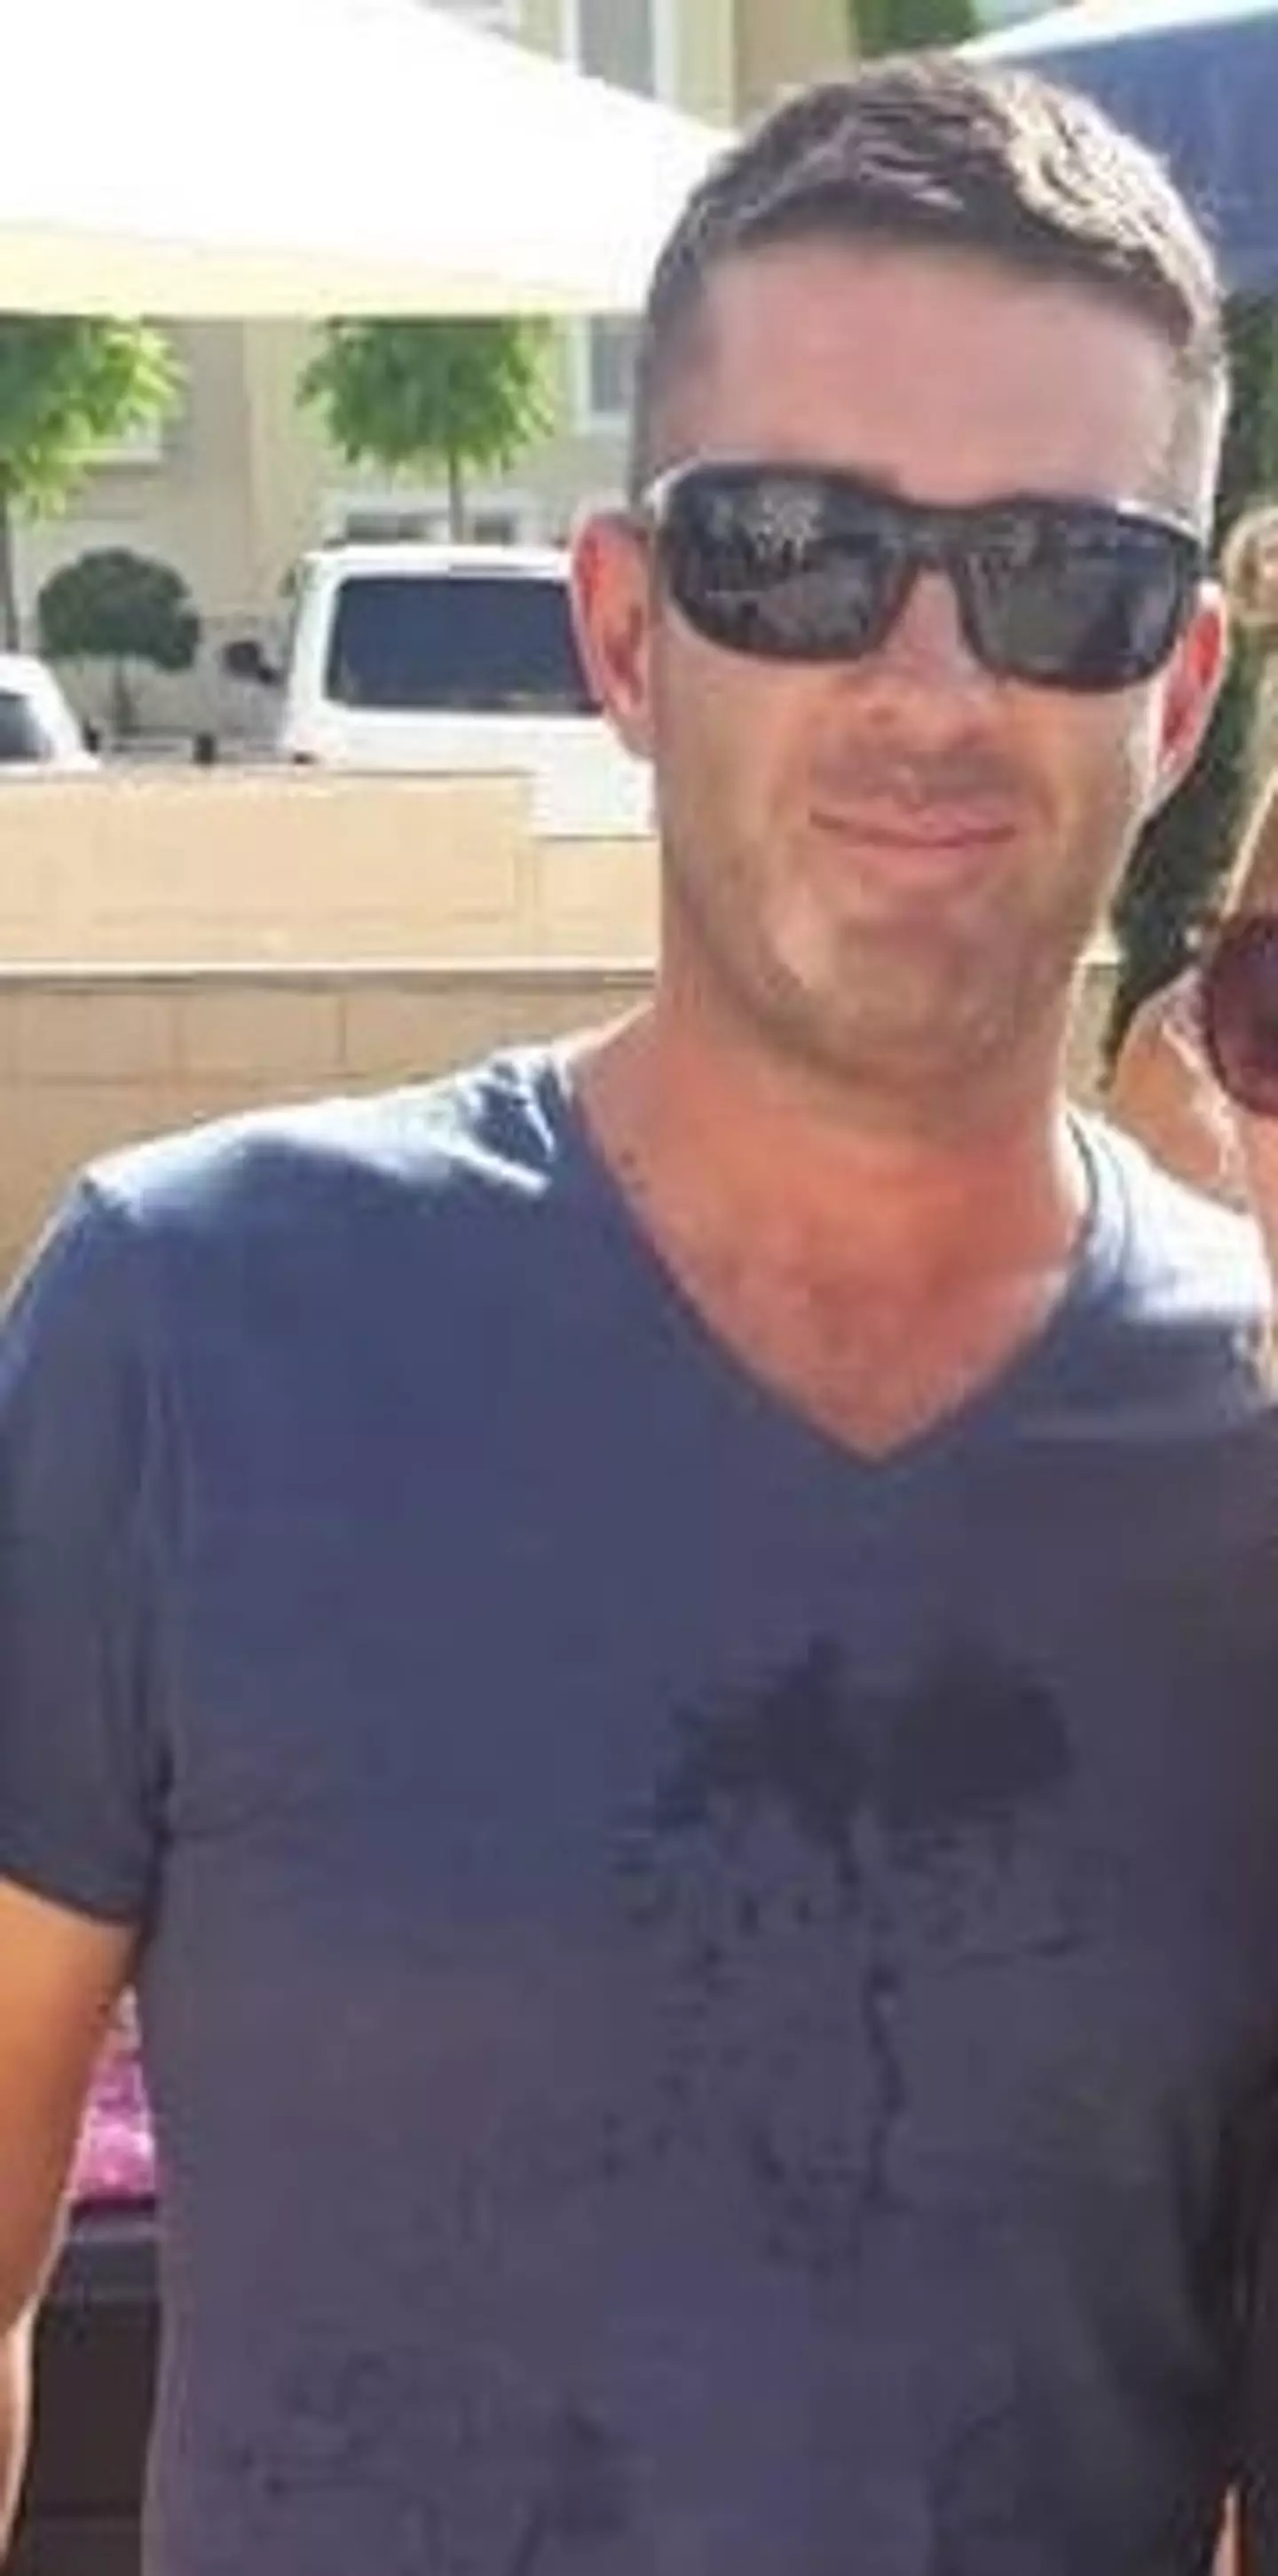 Christopher Thomson, 43, was drinking heavily in the departure lounge before takeoff from Manchester airport on 16 September of last year.